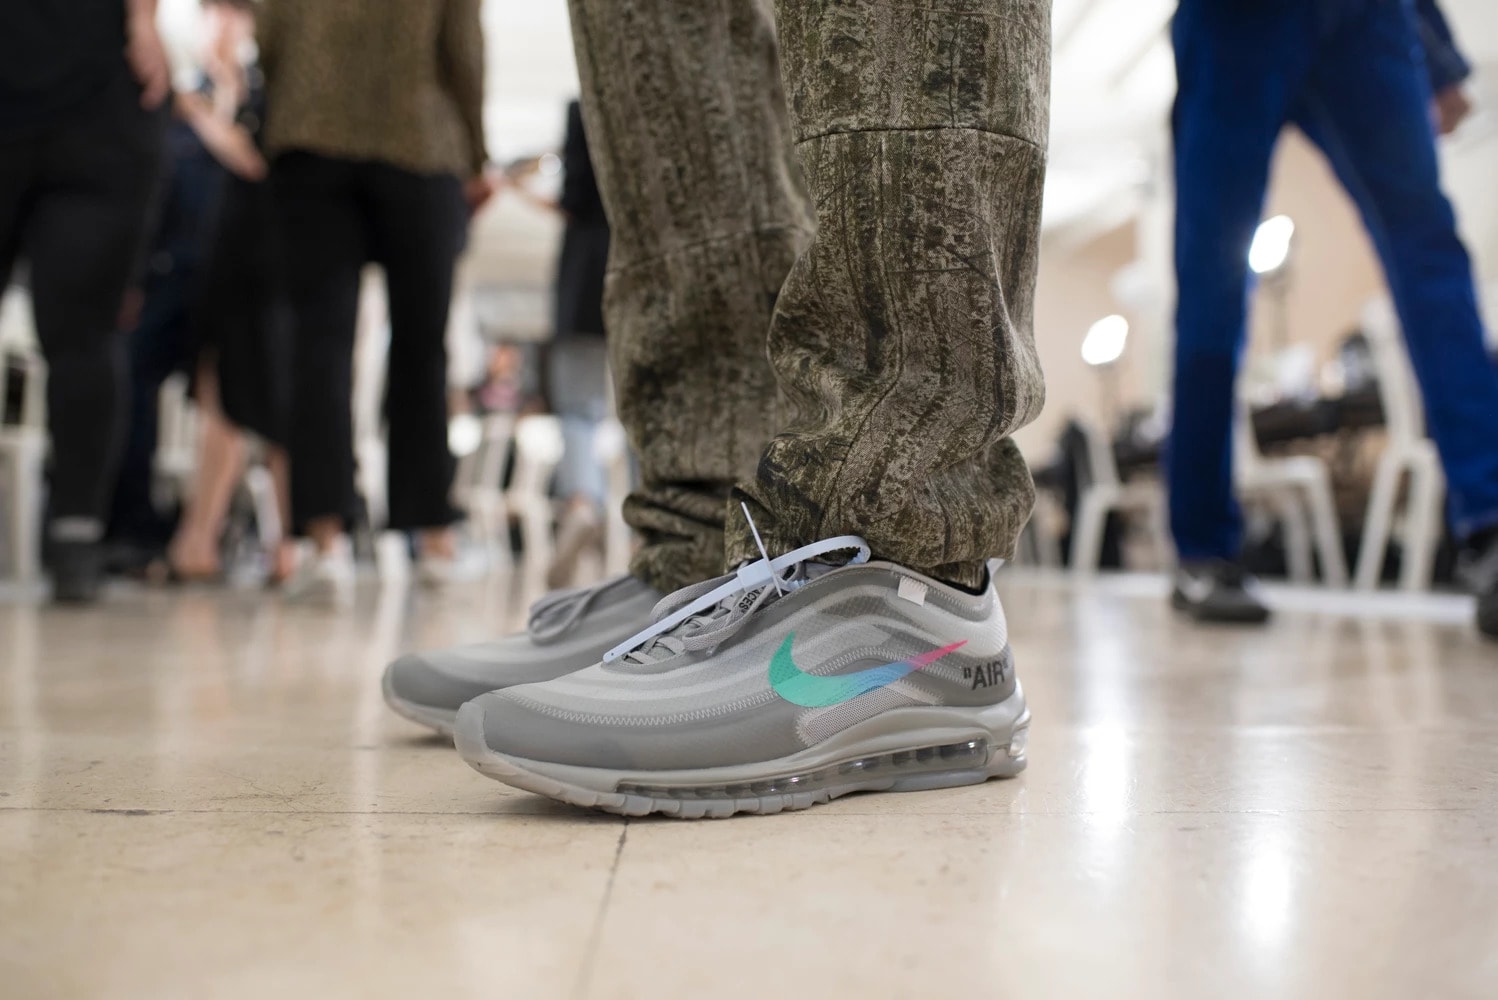 Off-White Virgil Abloh Menswear Spring/Summer 2019 Paris Fashion Week Men's Collection Backstage Nike Air Max 97 Blue Multi-Colored